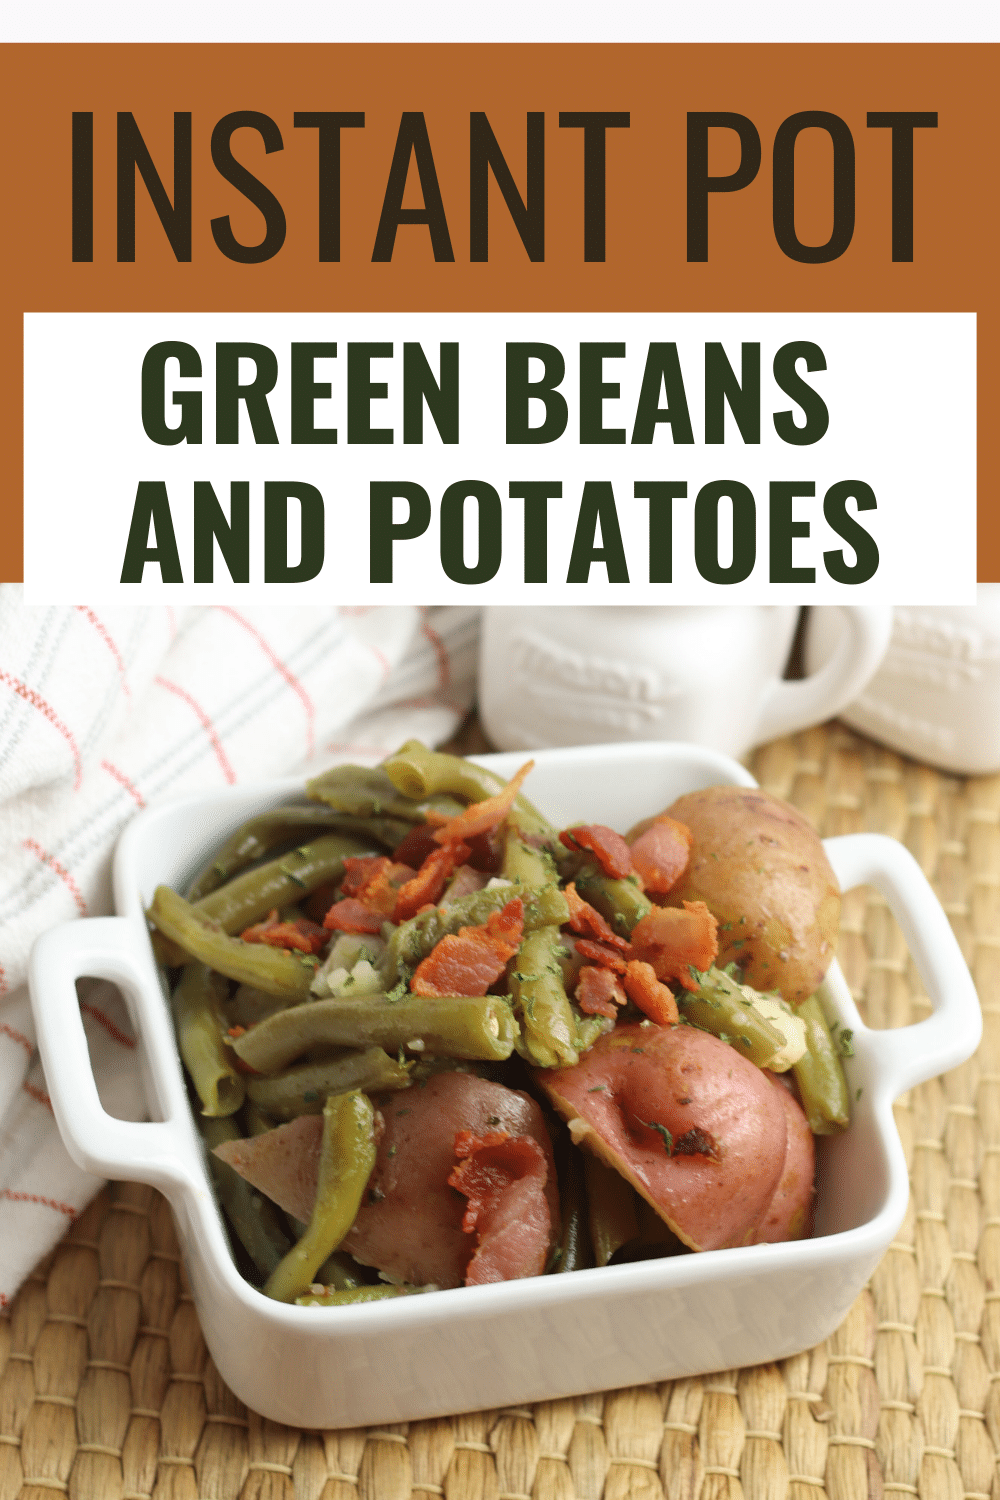 Instant Pot Green Beans and Potatoes are a delicious and healthy side dish perfect for a weeknight meal. It's ready in just 30 minutes. #instantpot #pressurecooker #greenbeans #potatoes #recipe via @wondermomwannab